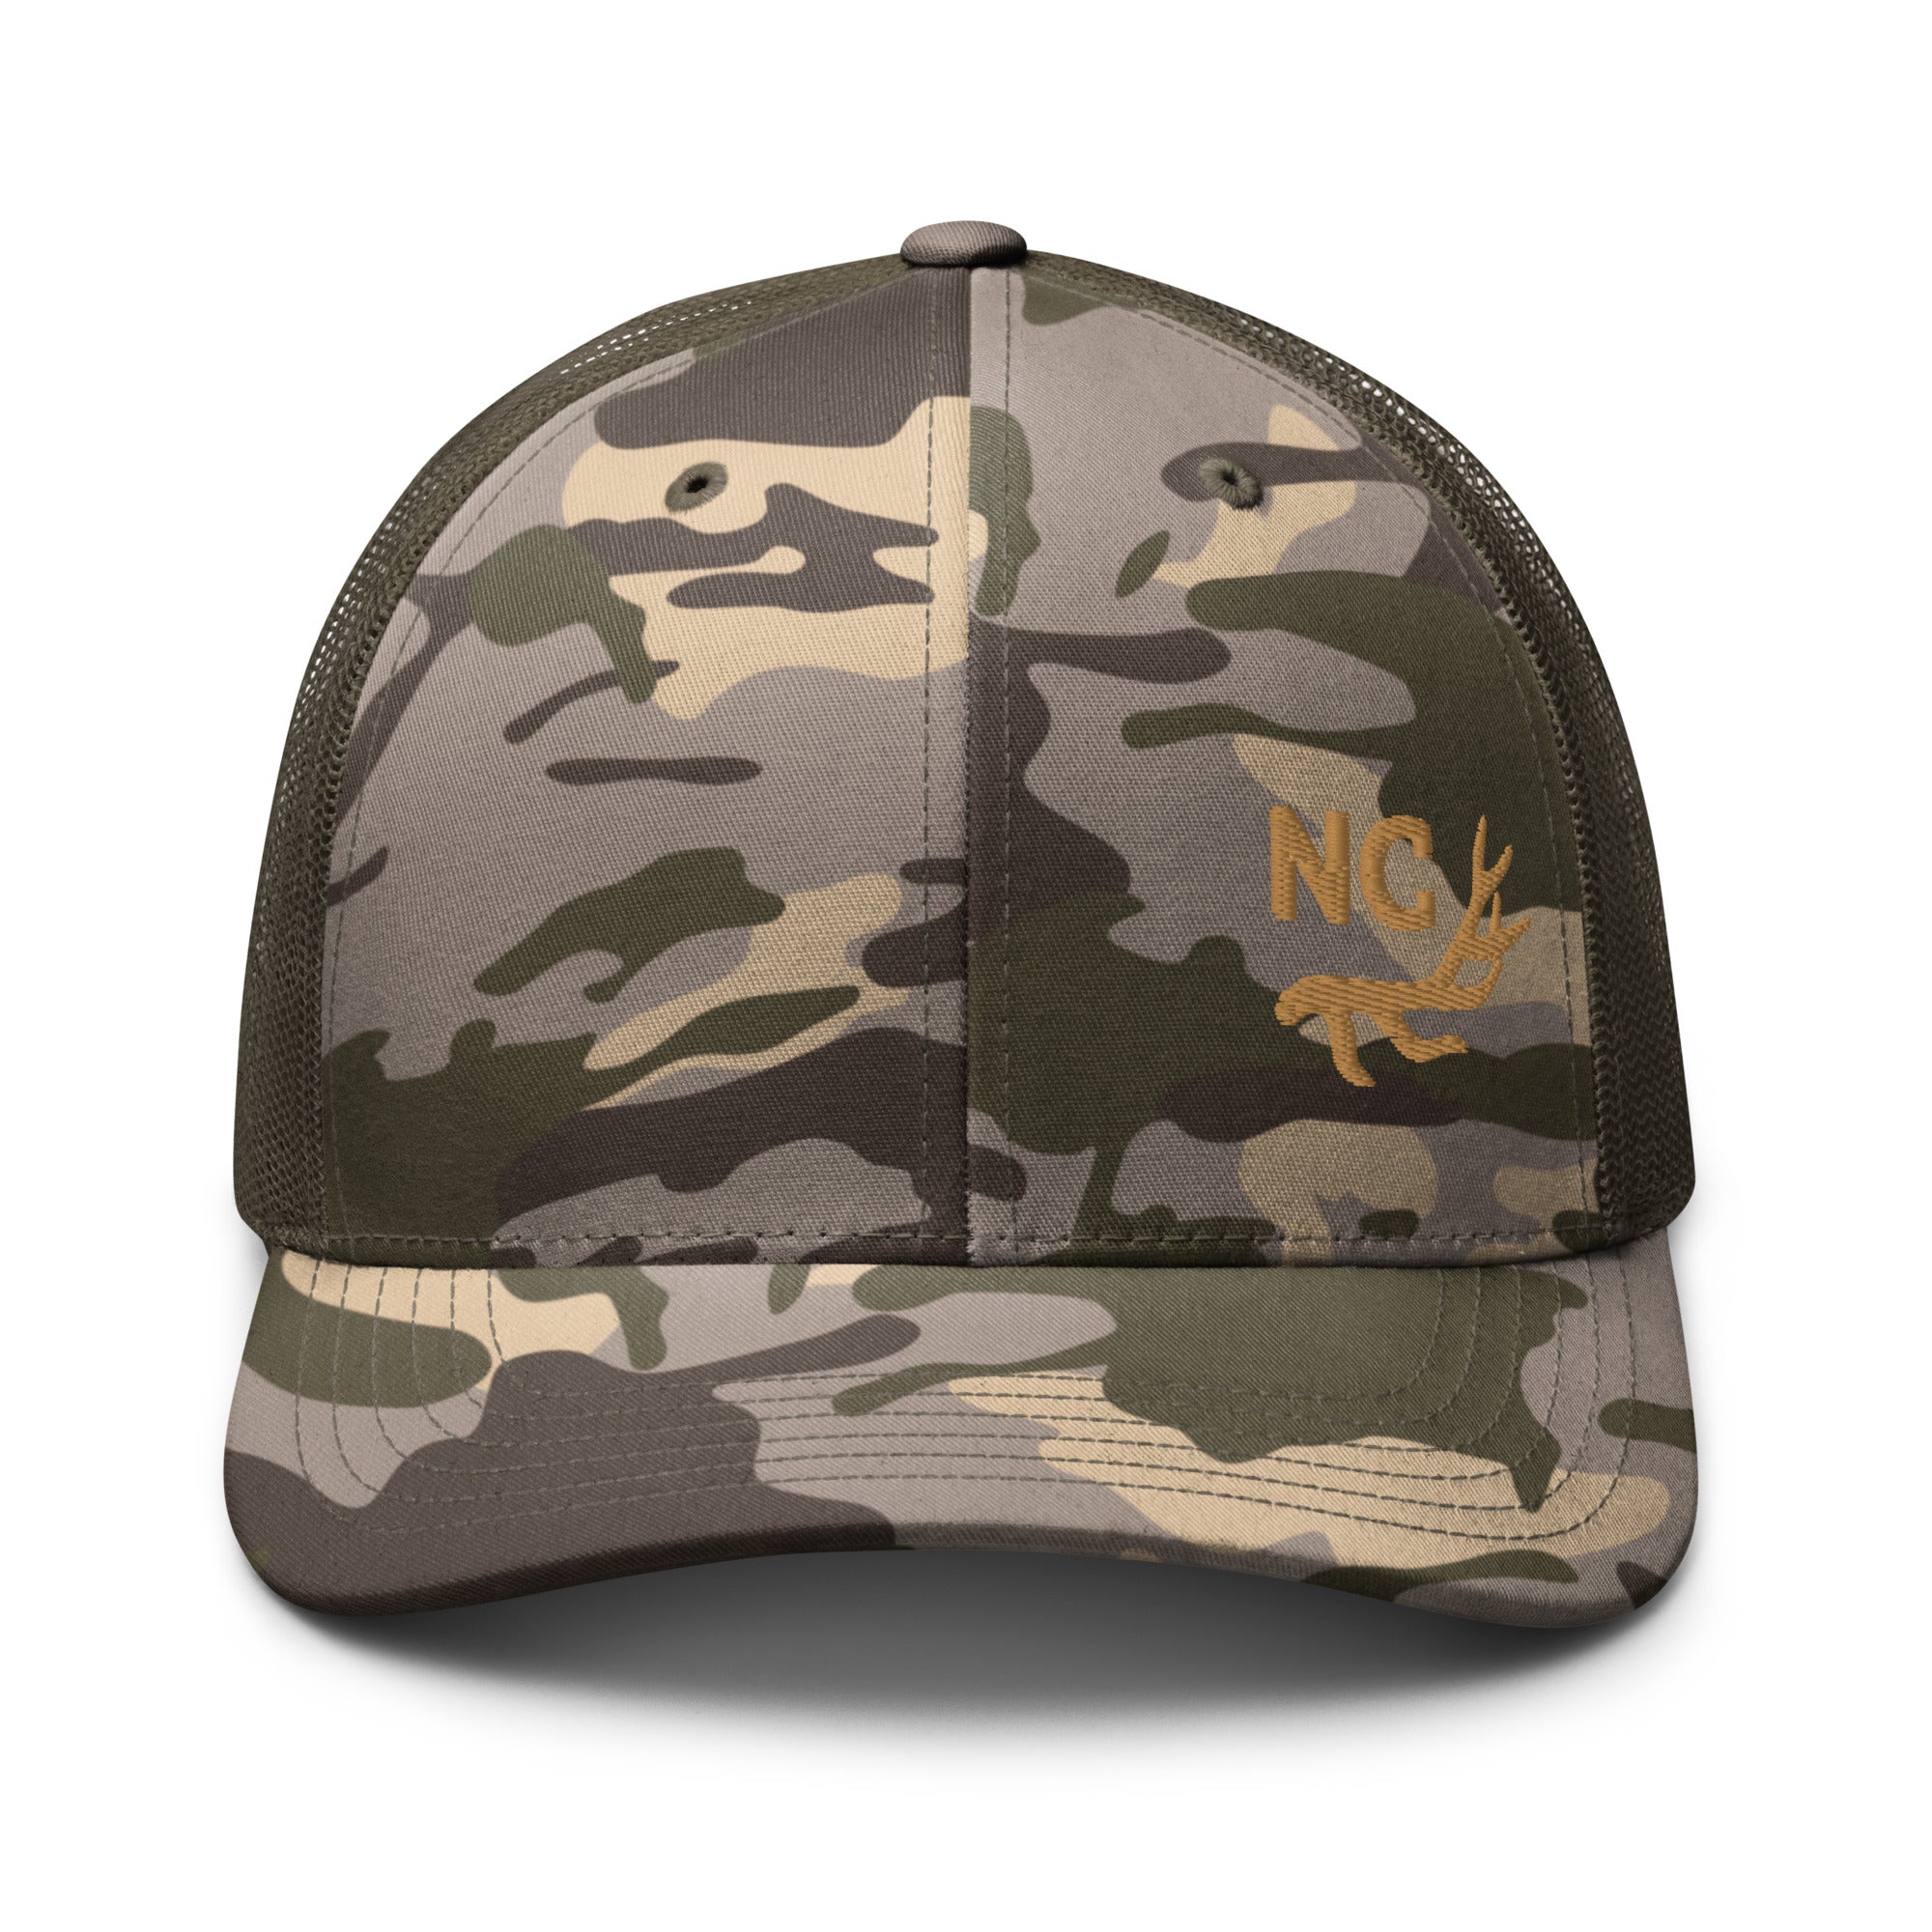 camouflage-trucker-hat-camo-olive-front-655e62aa5fcd0.jpg